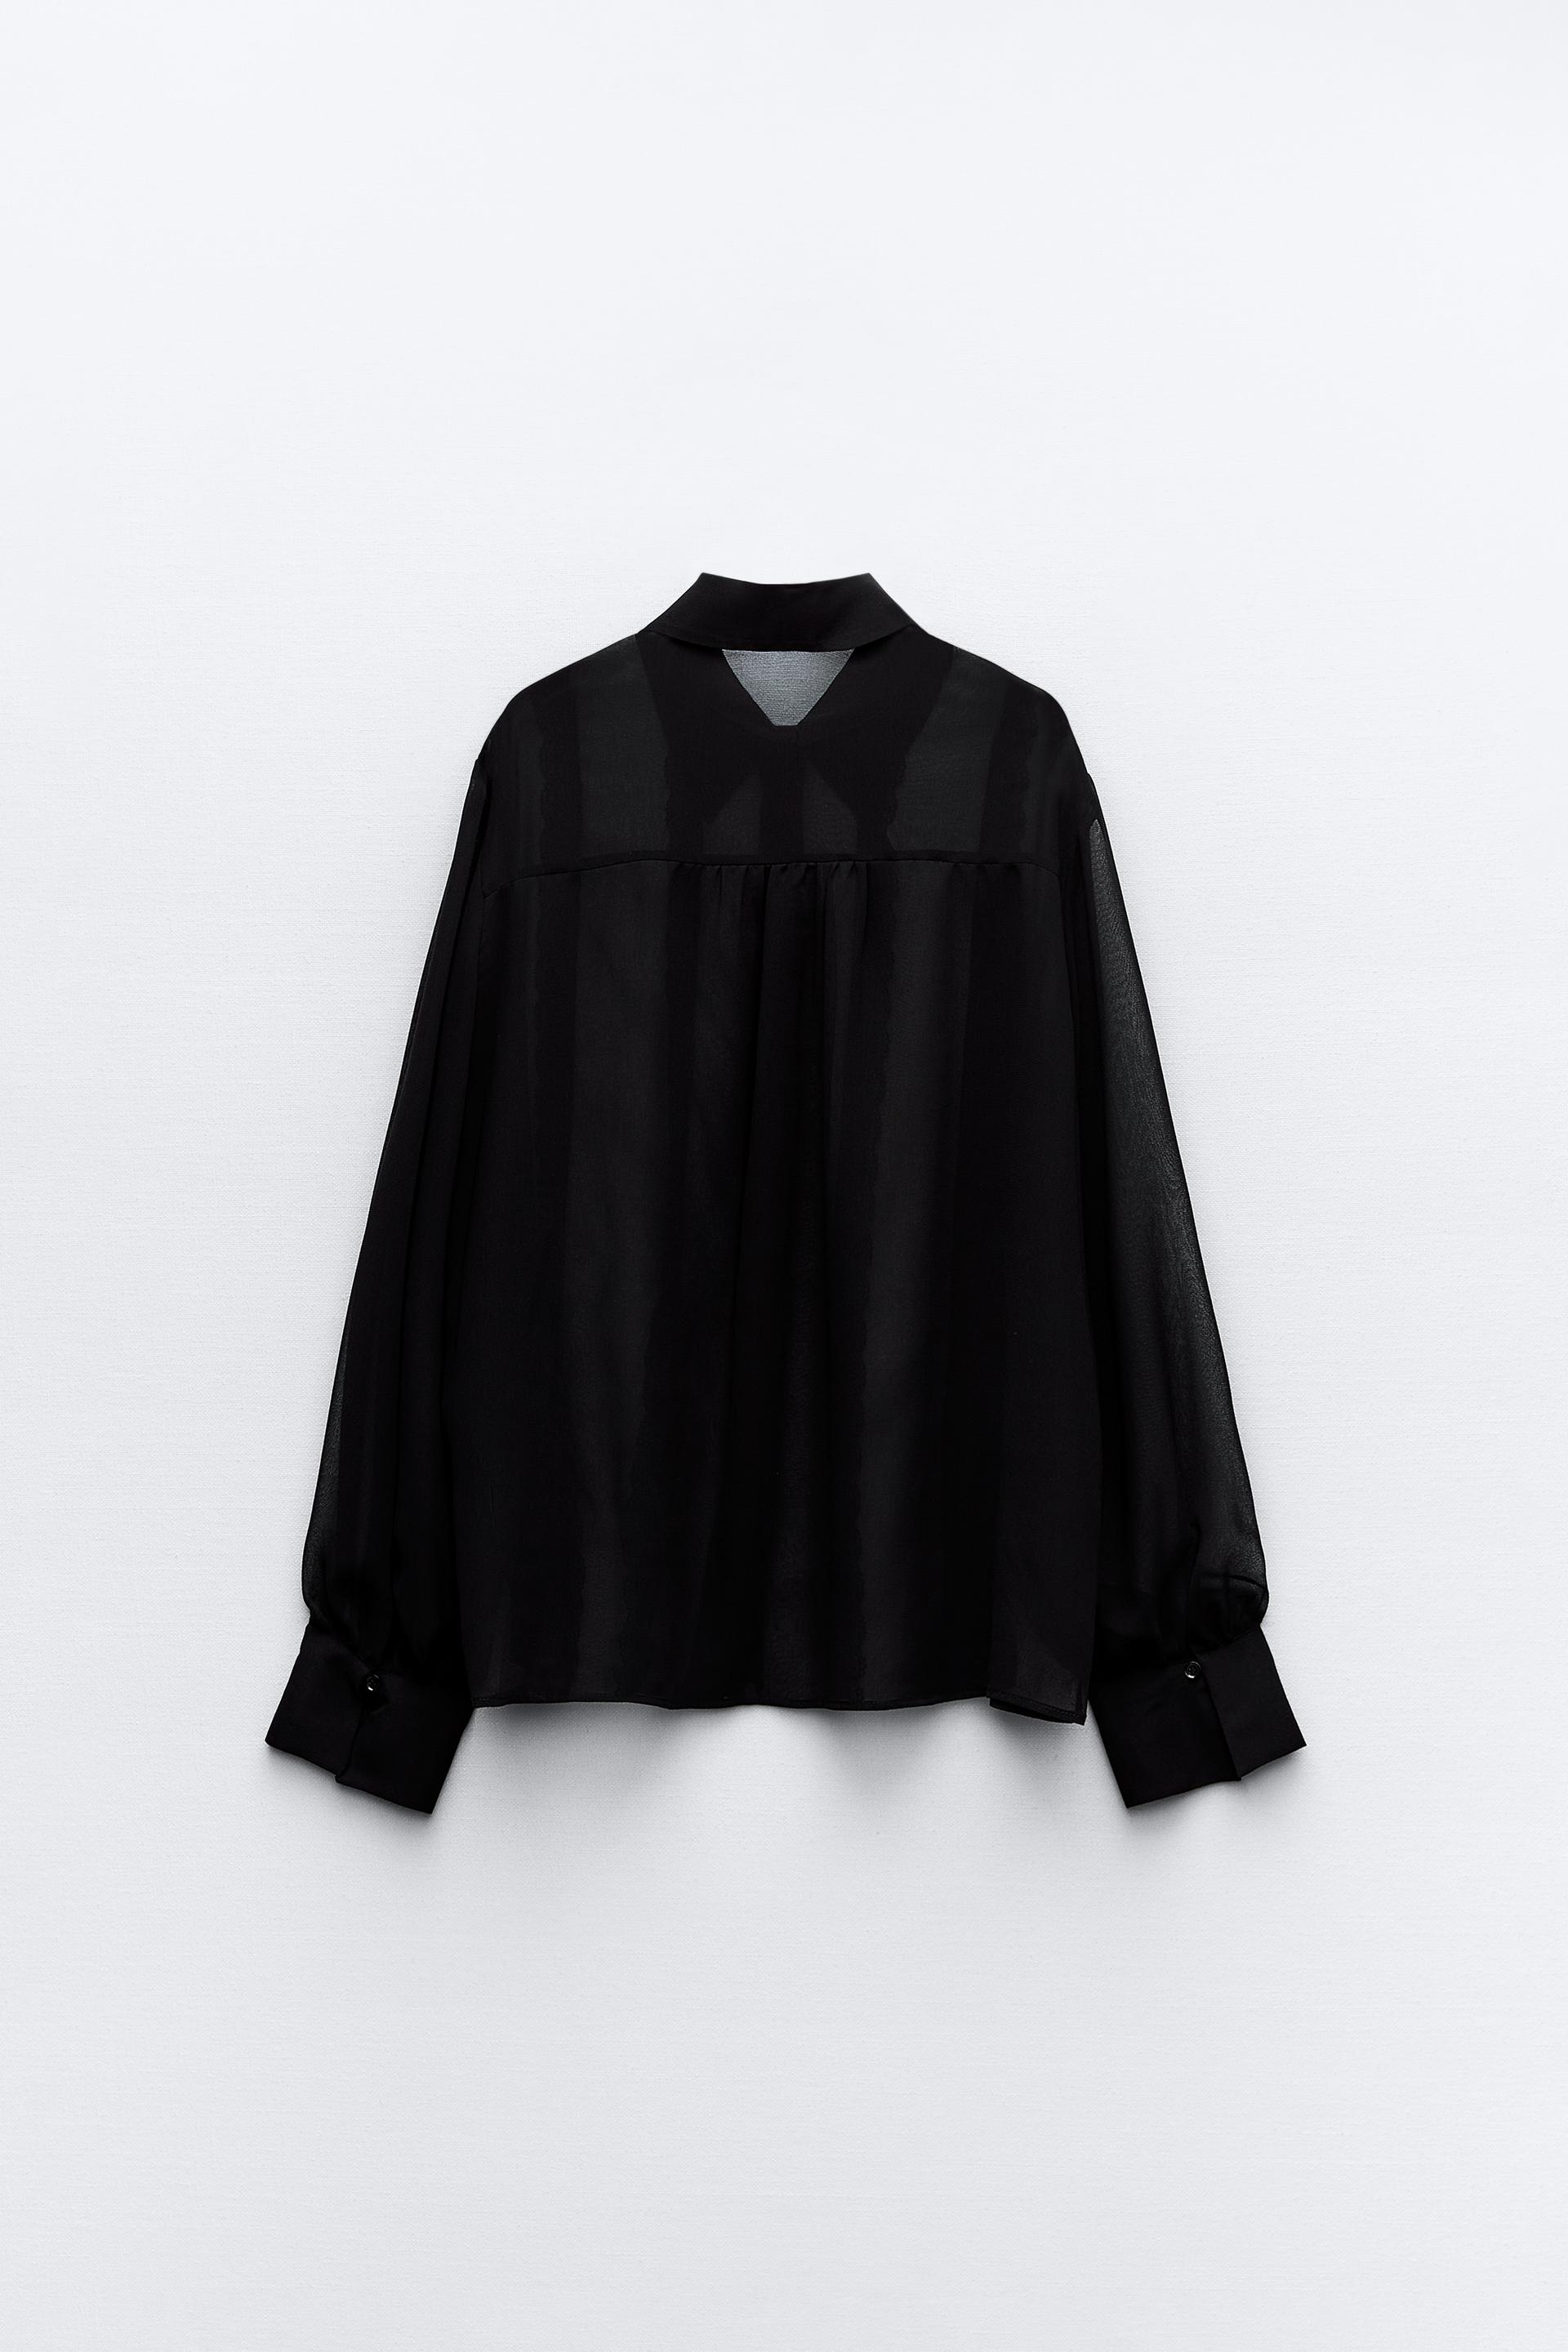 Black Sheer Textured Fitted Shirt, Tops